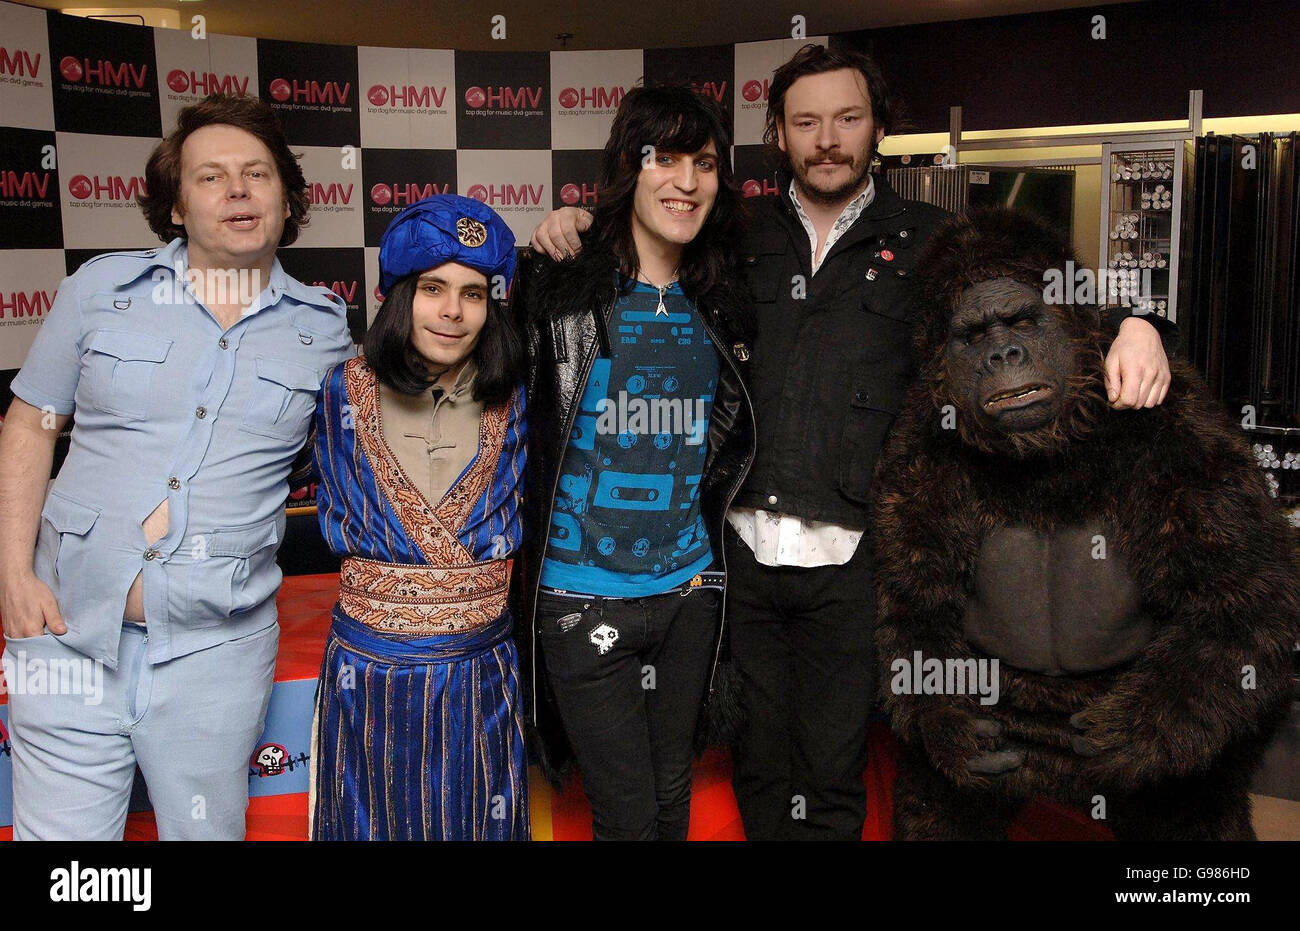 (L-R) Rich Fulcher ('Bob Fossil') Michael Fielding ('Naboo') Noel Fielding (Vince Noir) Julian Barratt (Howard Moon) and Dave Brown (Bollo) at the DVD launch of 'The Mighty Boosh' (Series 2), at HMV, central London, Thursday 30 March 2006. PRESS ASSOCIATION PHOTO. Photo credit should read: Ian West/PA Stock Photo